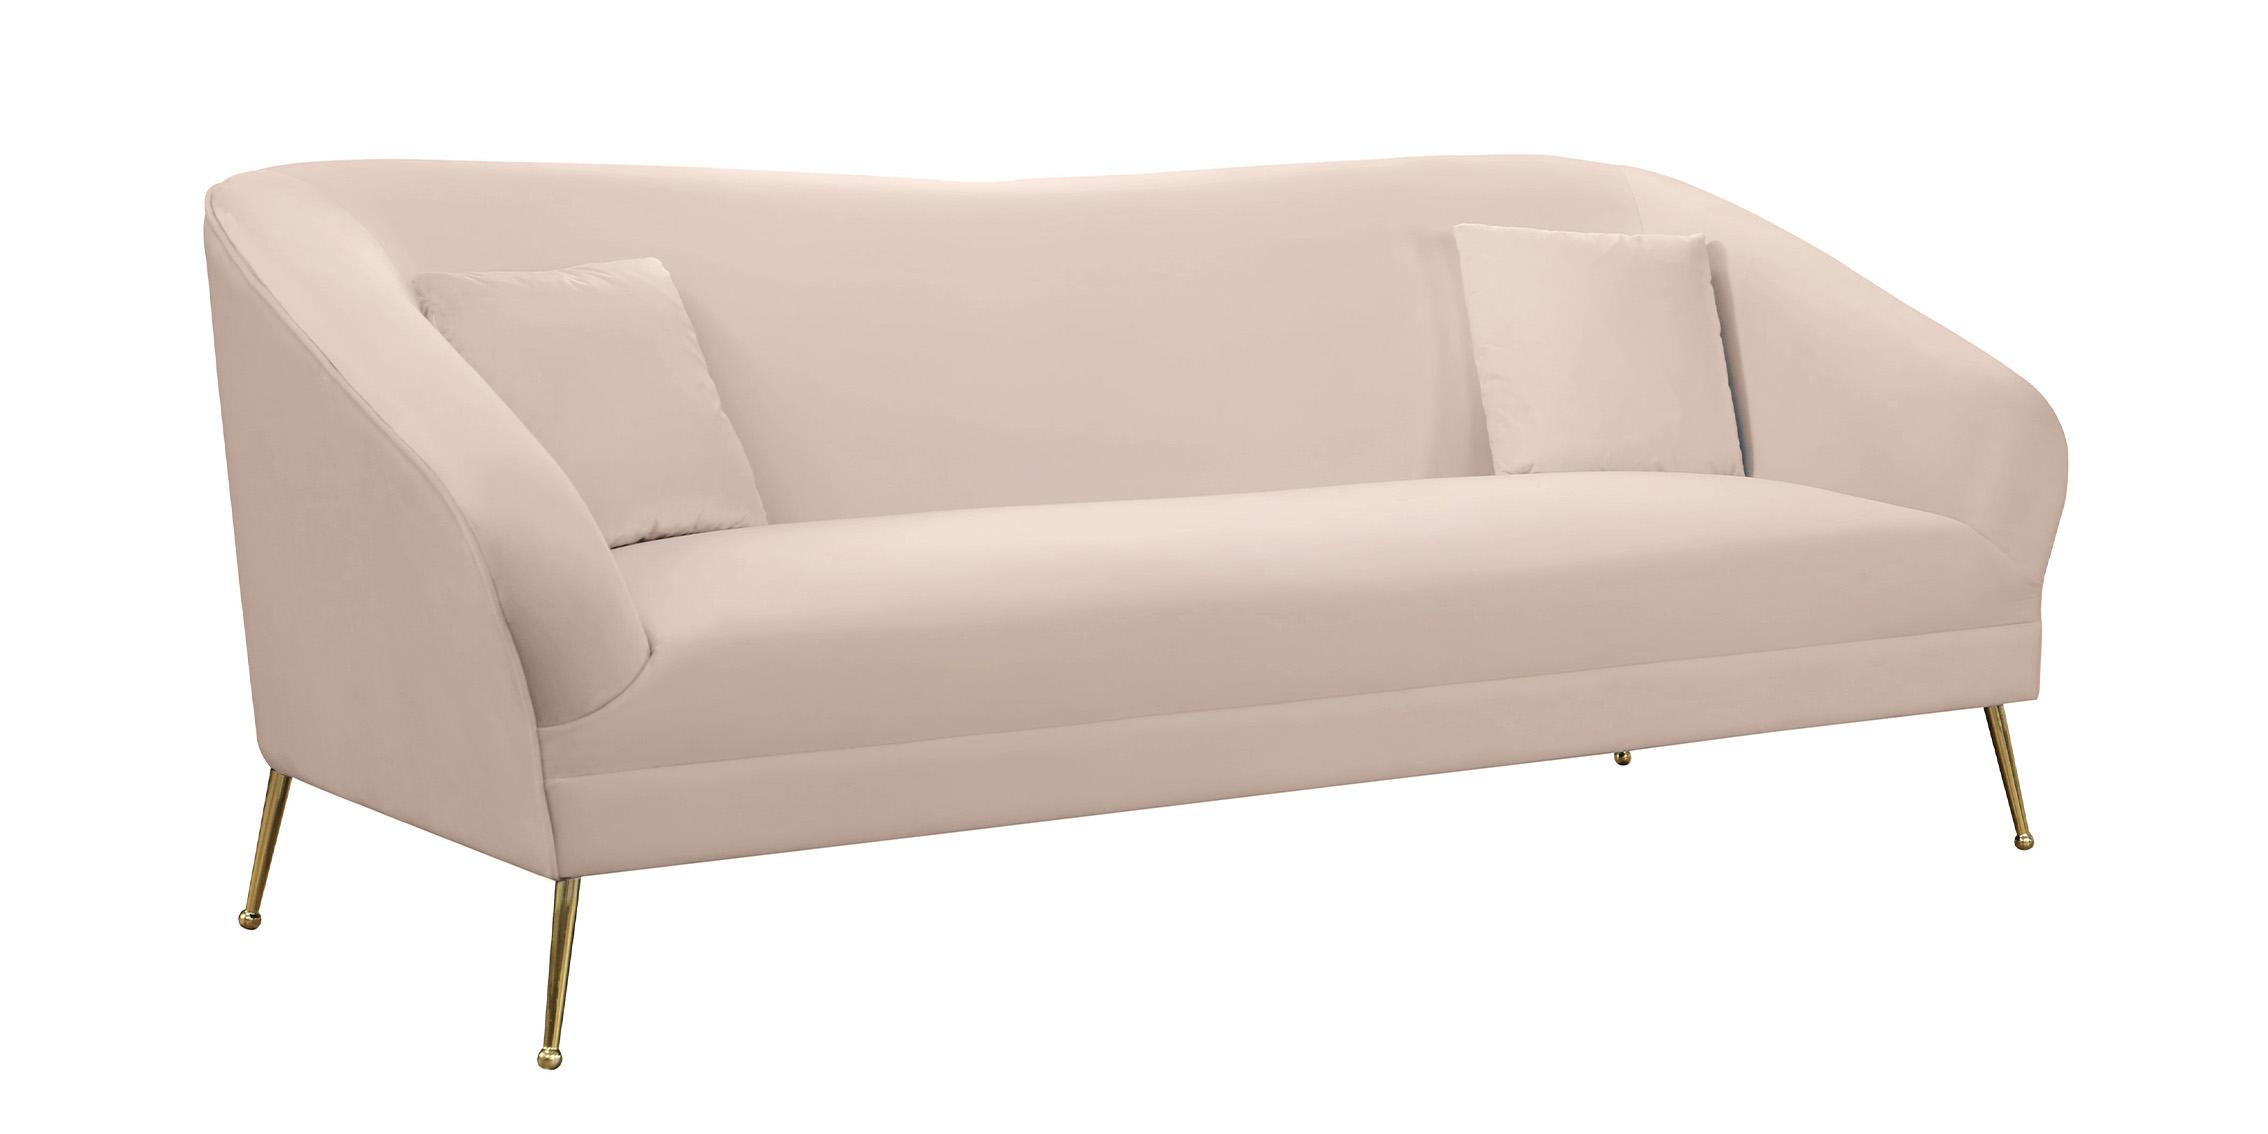 Contemporary, Modern Sofa HERMOSA 658Pink-S 658Pink-S in Pink Velvet